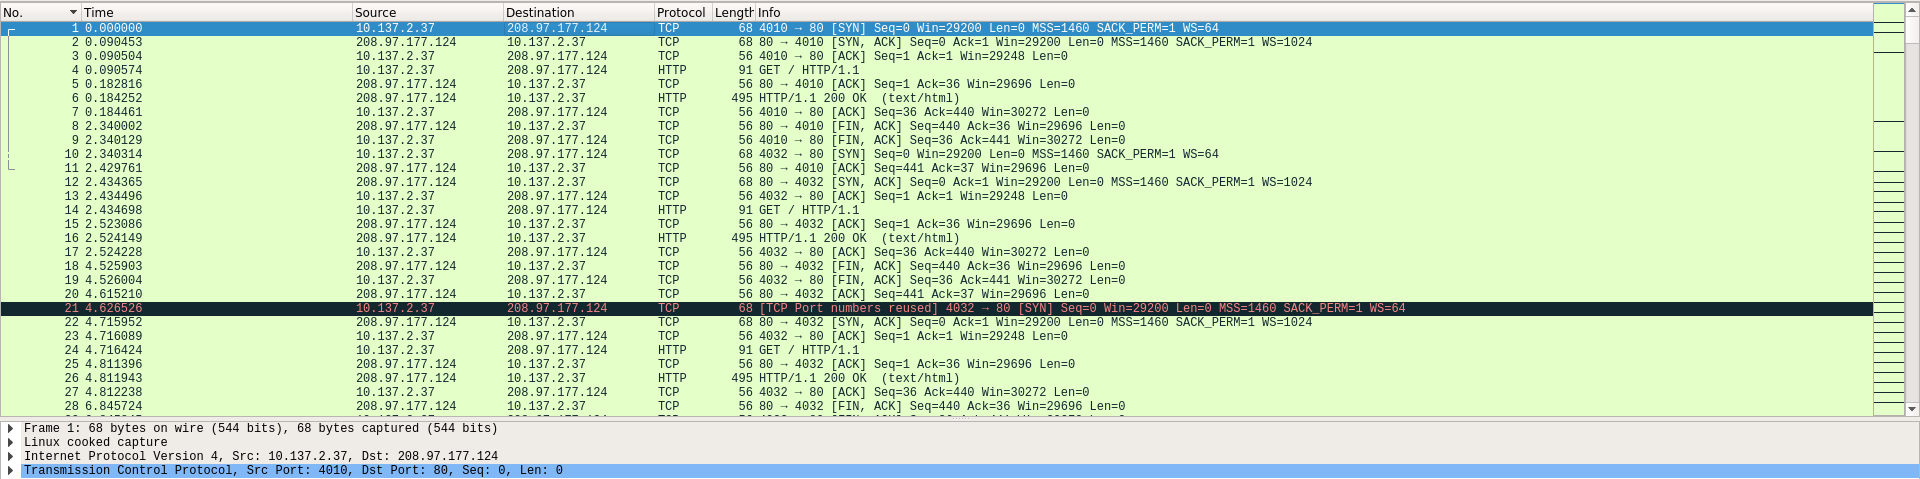 pcap_file_wireshark_packets